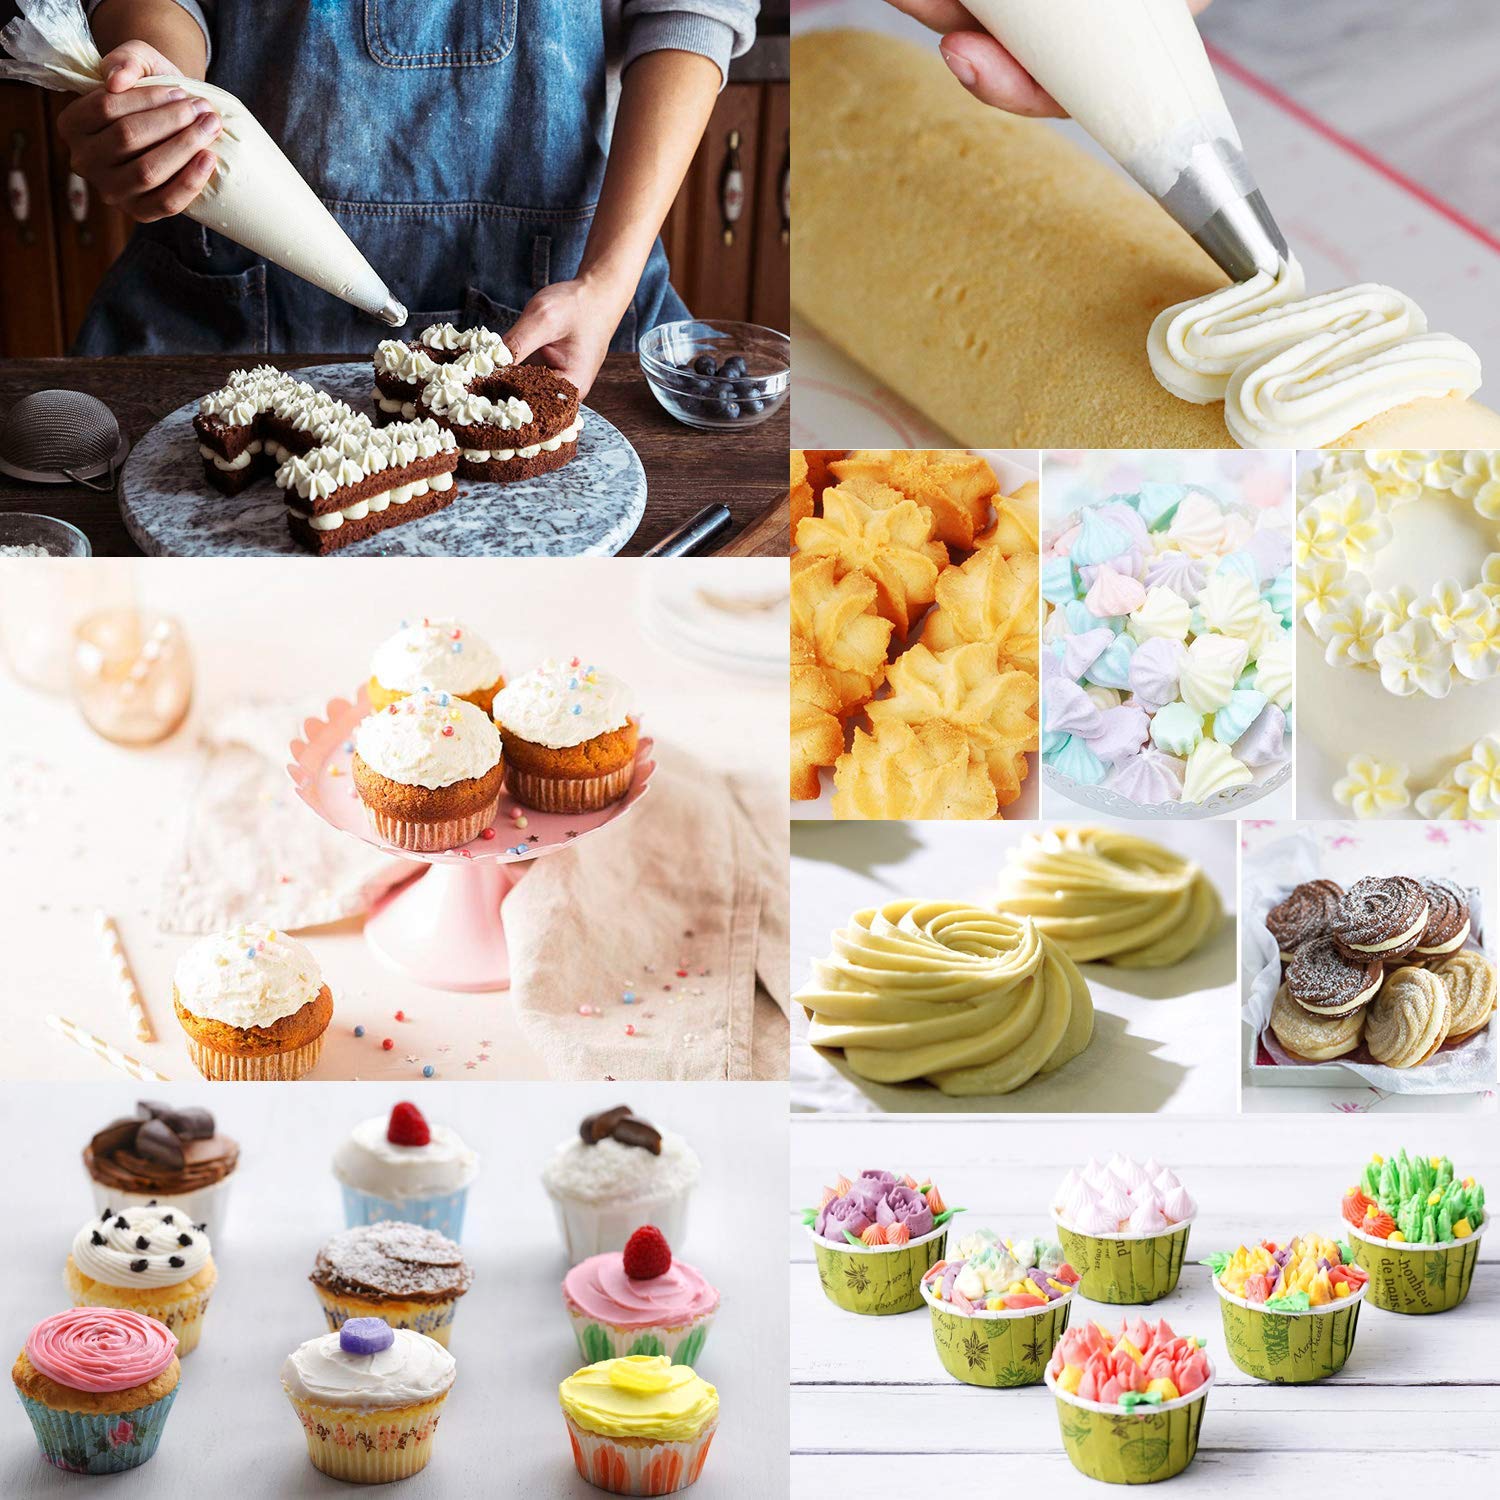 300 Pcs Pastry Piping Bags 13 inch Disposable Icing Cream Bag for Cookie Cake Decorating